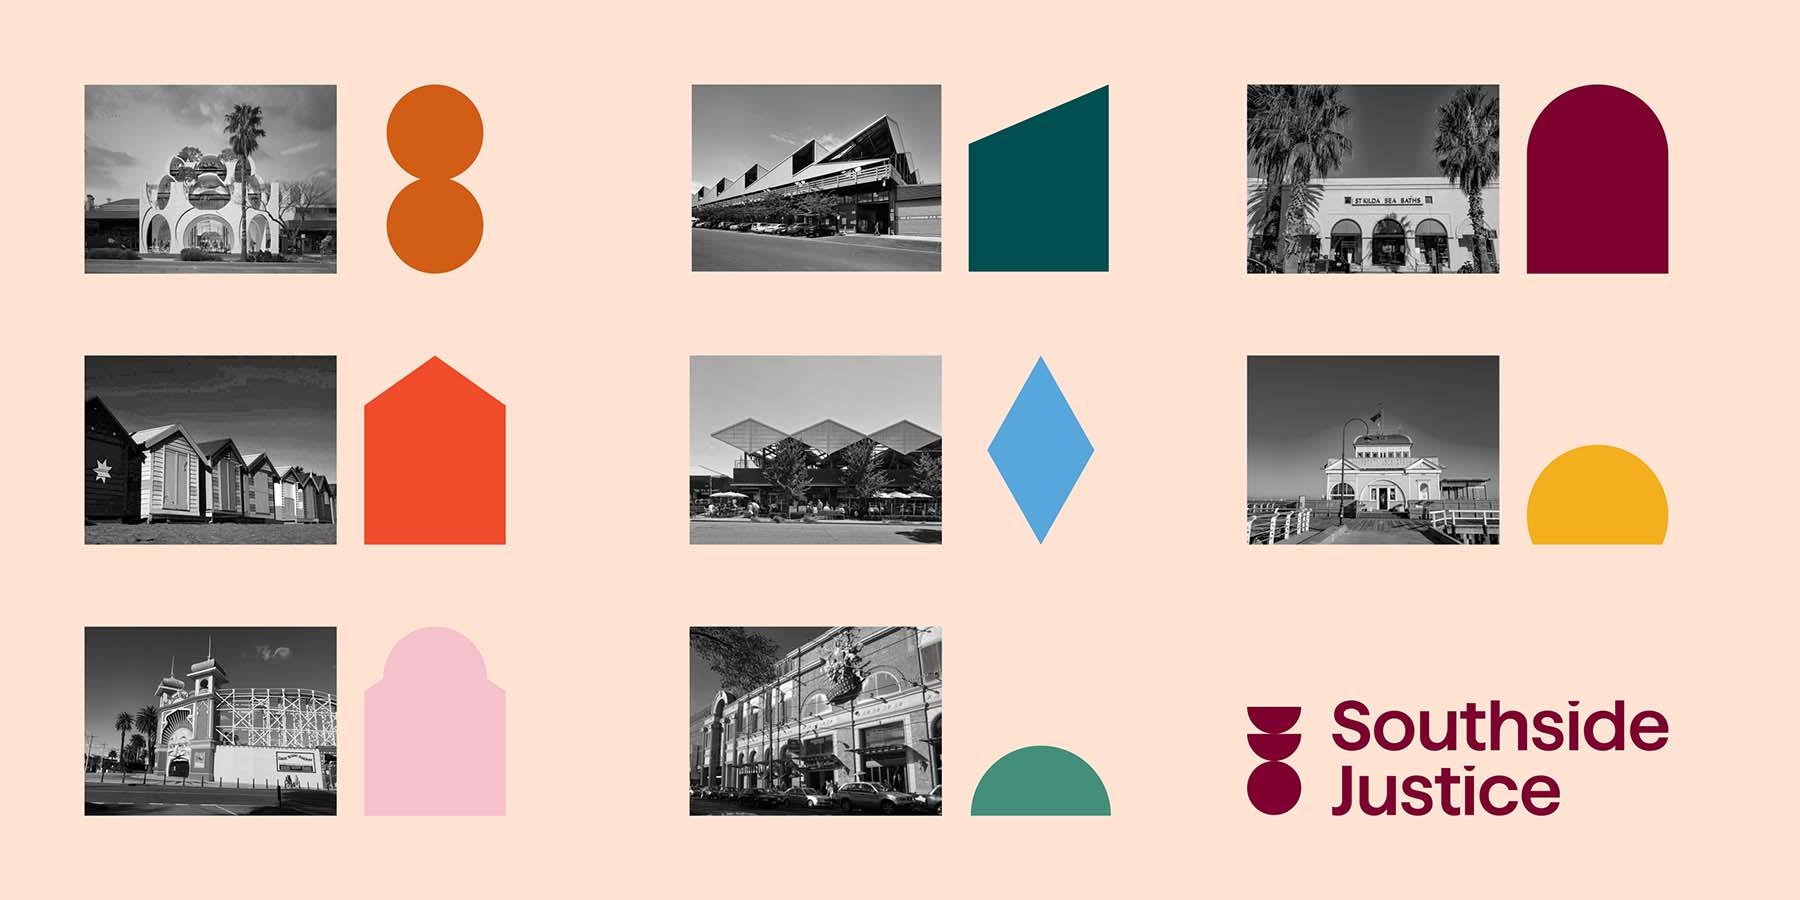 Brand language consists of graphic shapes derived from iconic architecture in the local community.